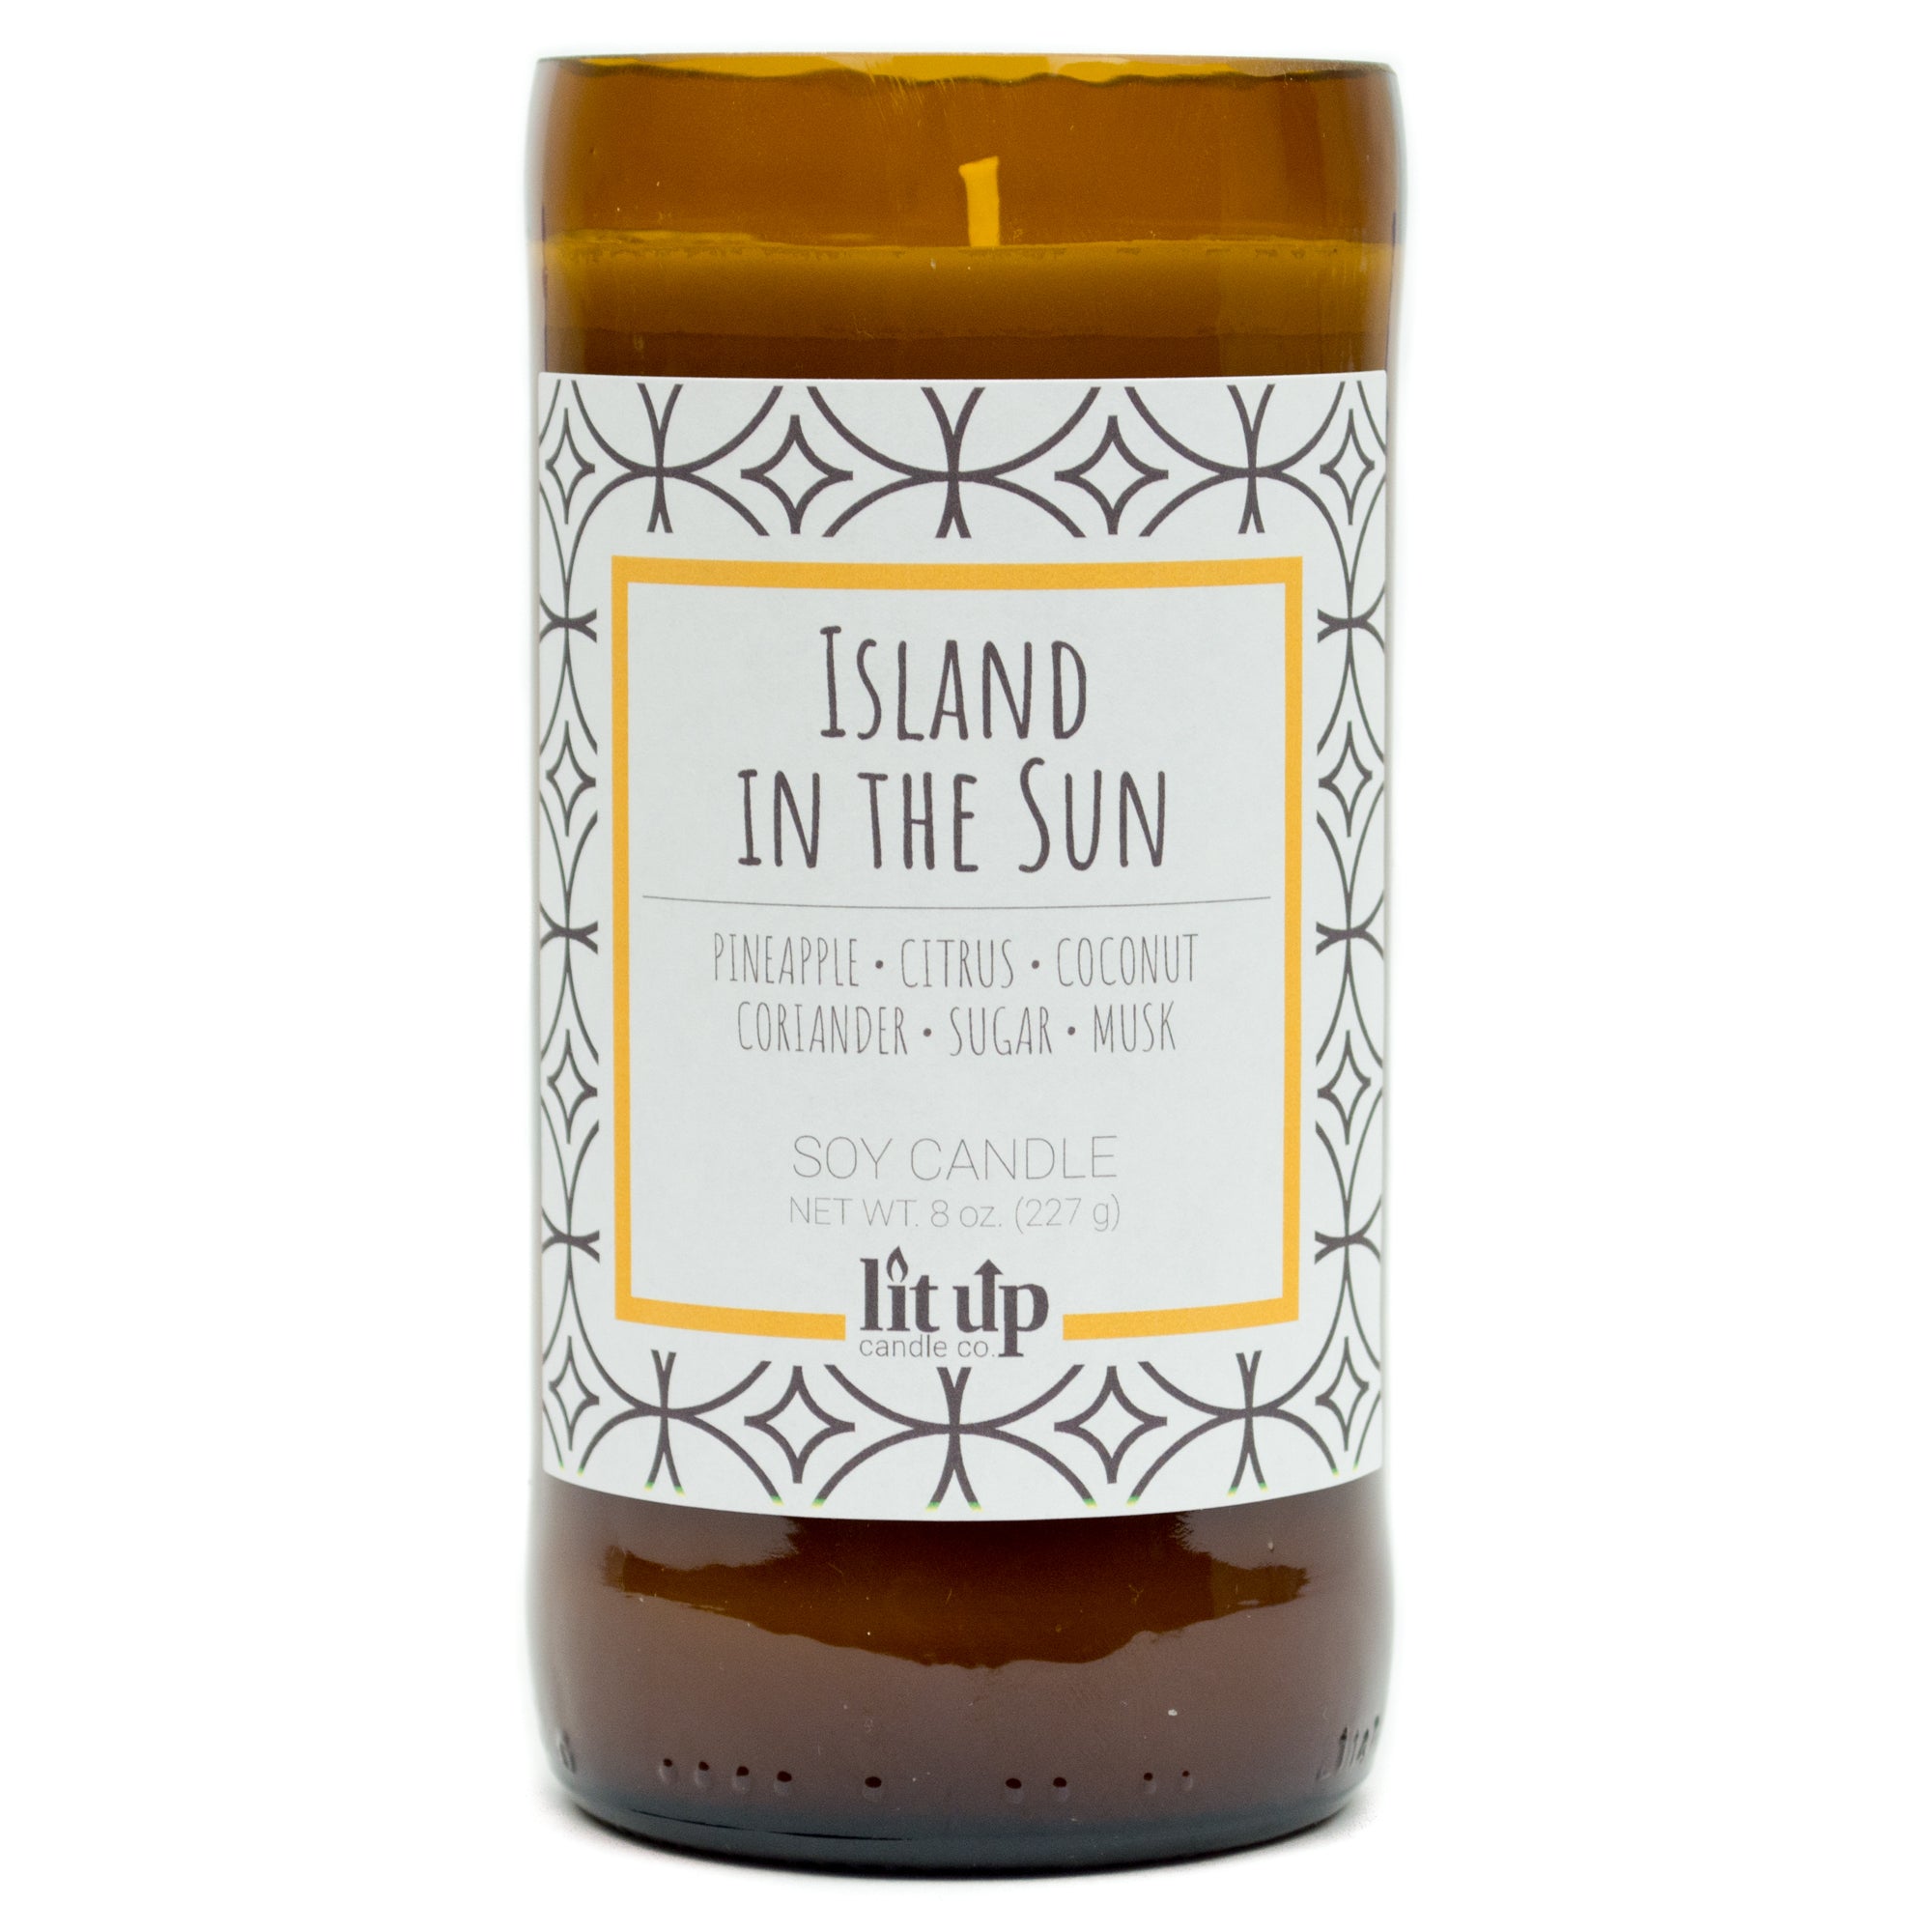 Island in the Sun scented 8 oz. soy candle in upcycled beer bottle - FKA Pineapple Cilantro